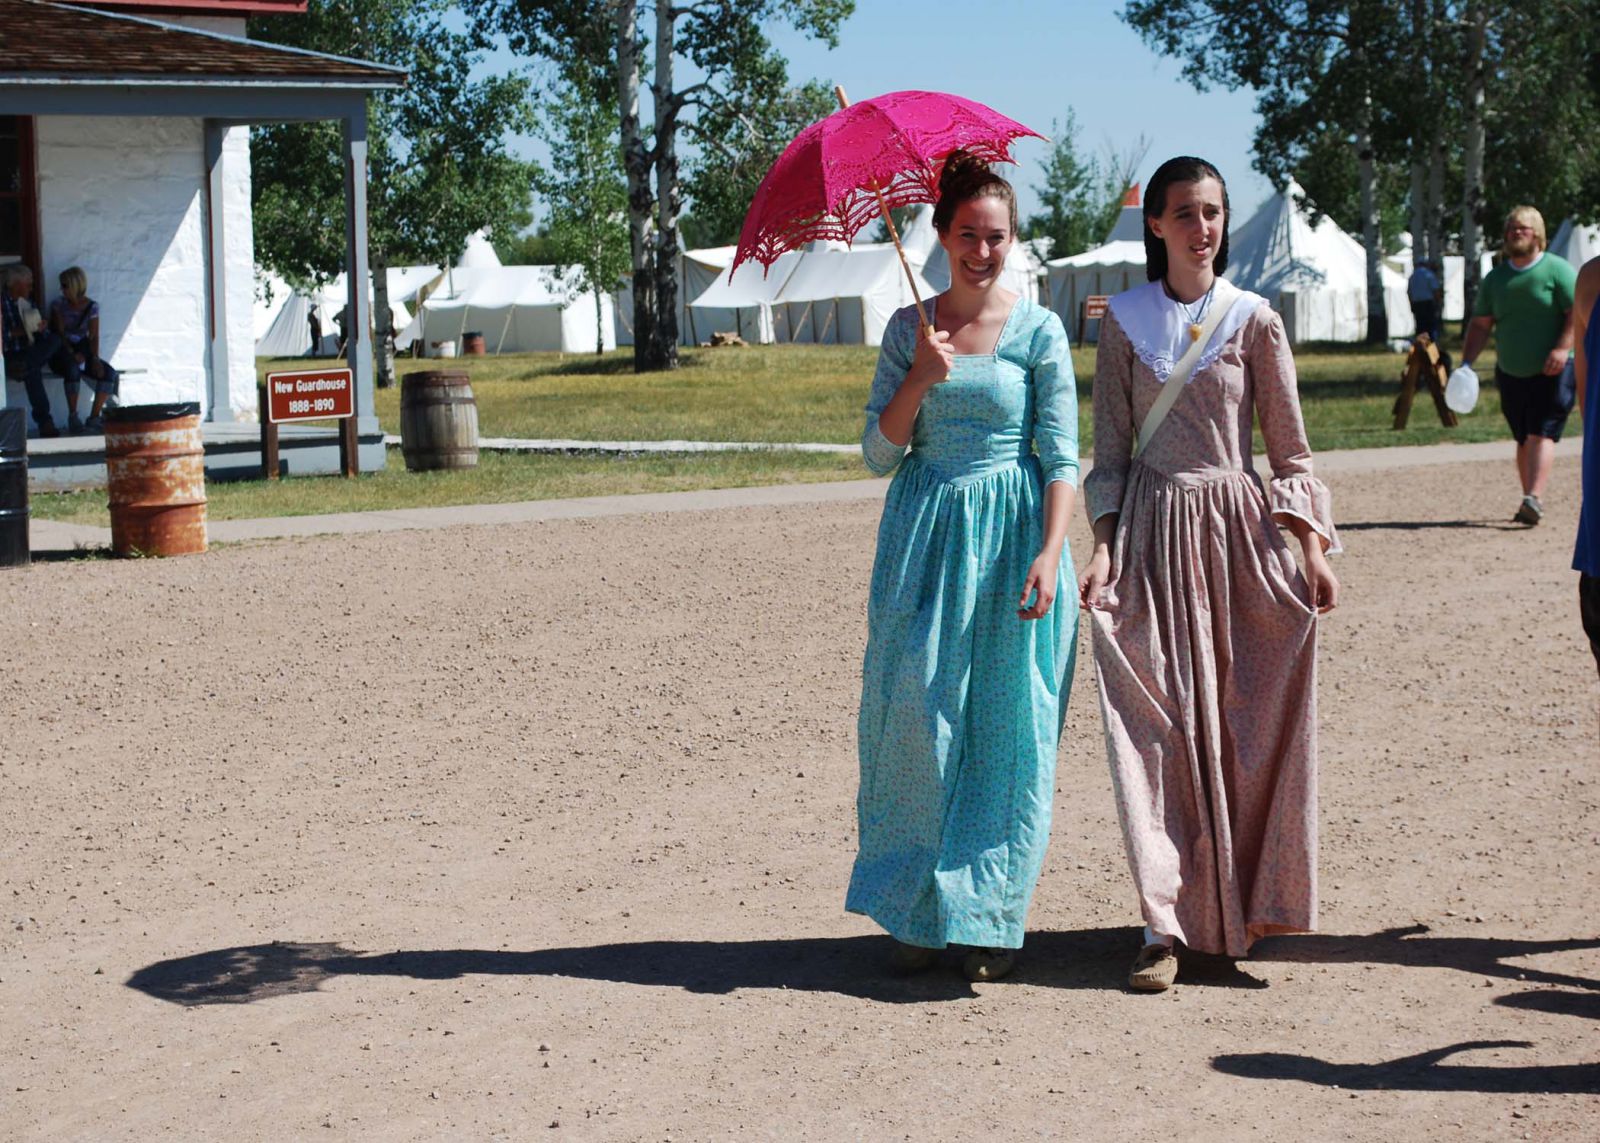 Every one is in period dress at Mountain Man Rendevous in Ft. Bridger, Wyoming.